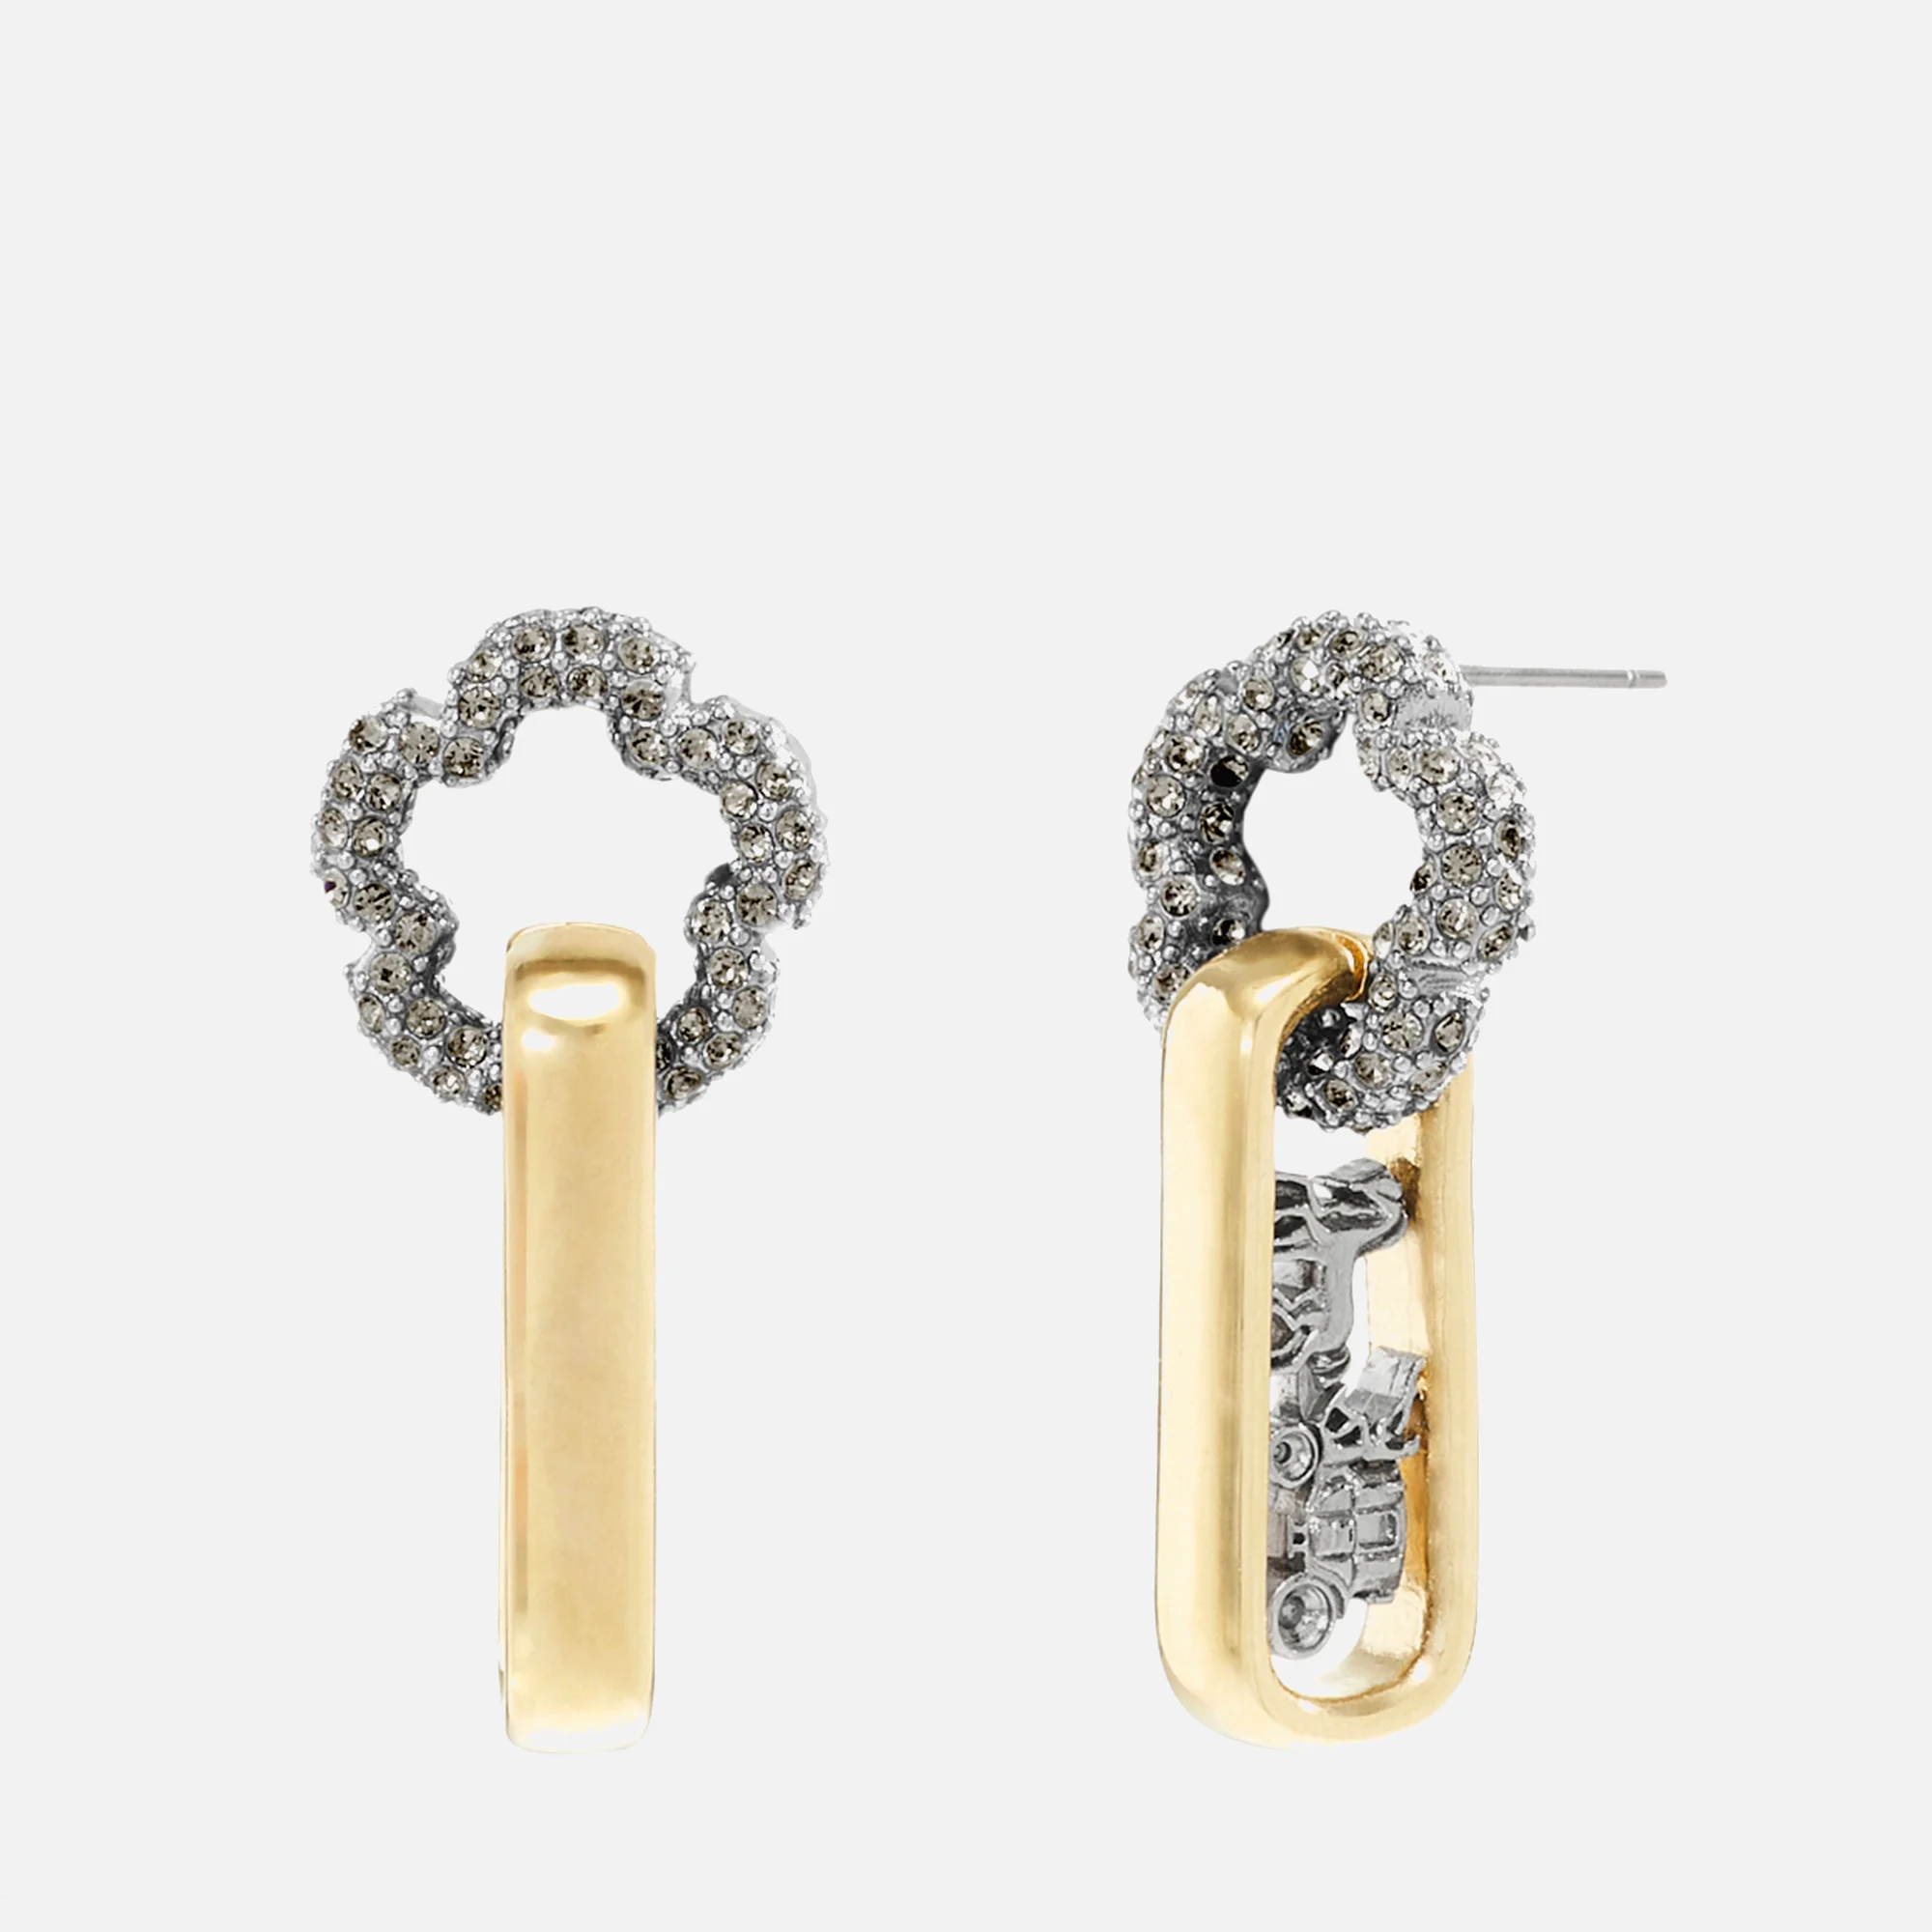 Coach Tearose Statement Gold and Silver-Tone Earrings Image 1